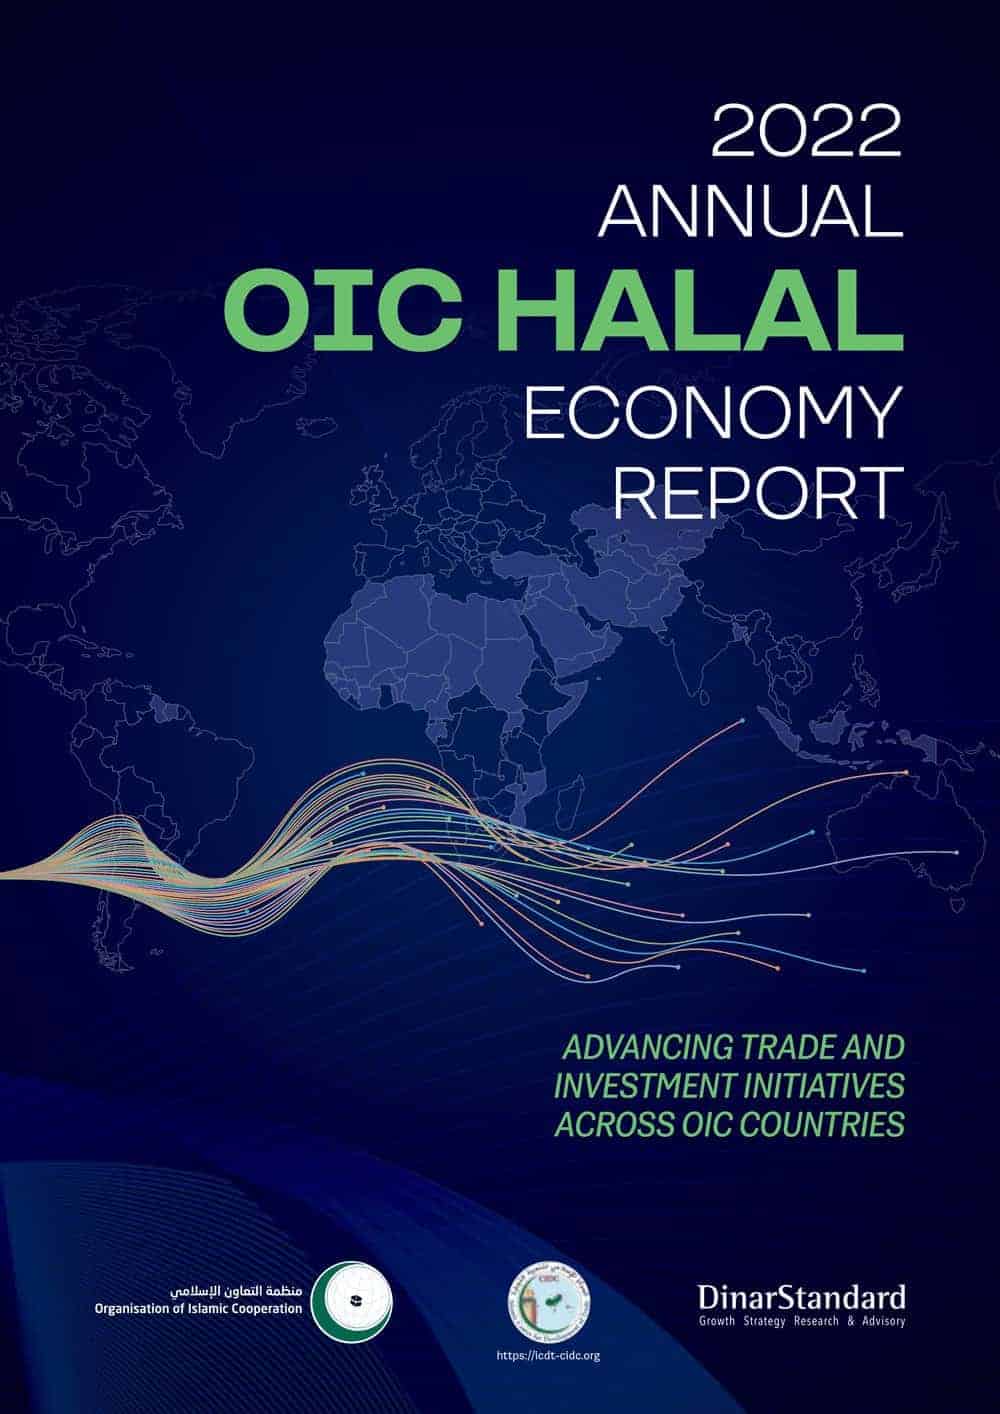 Annual OIC Halal Economy Report 2022